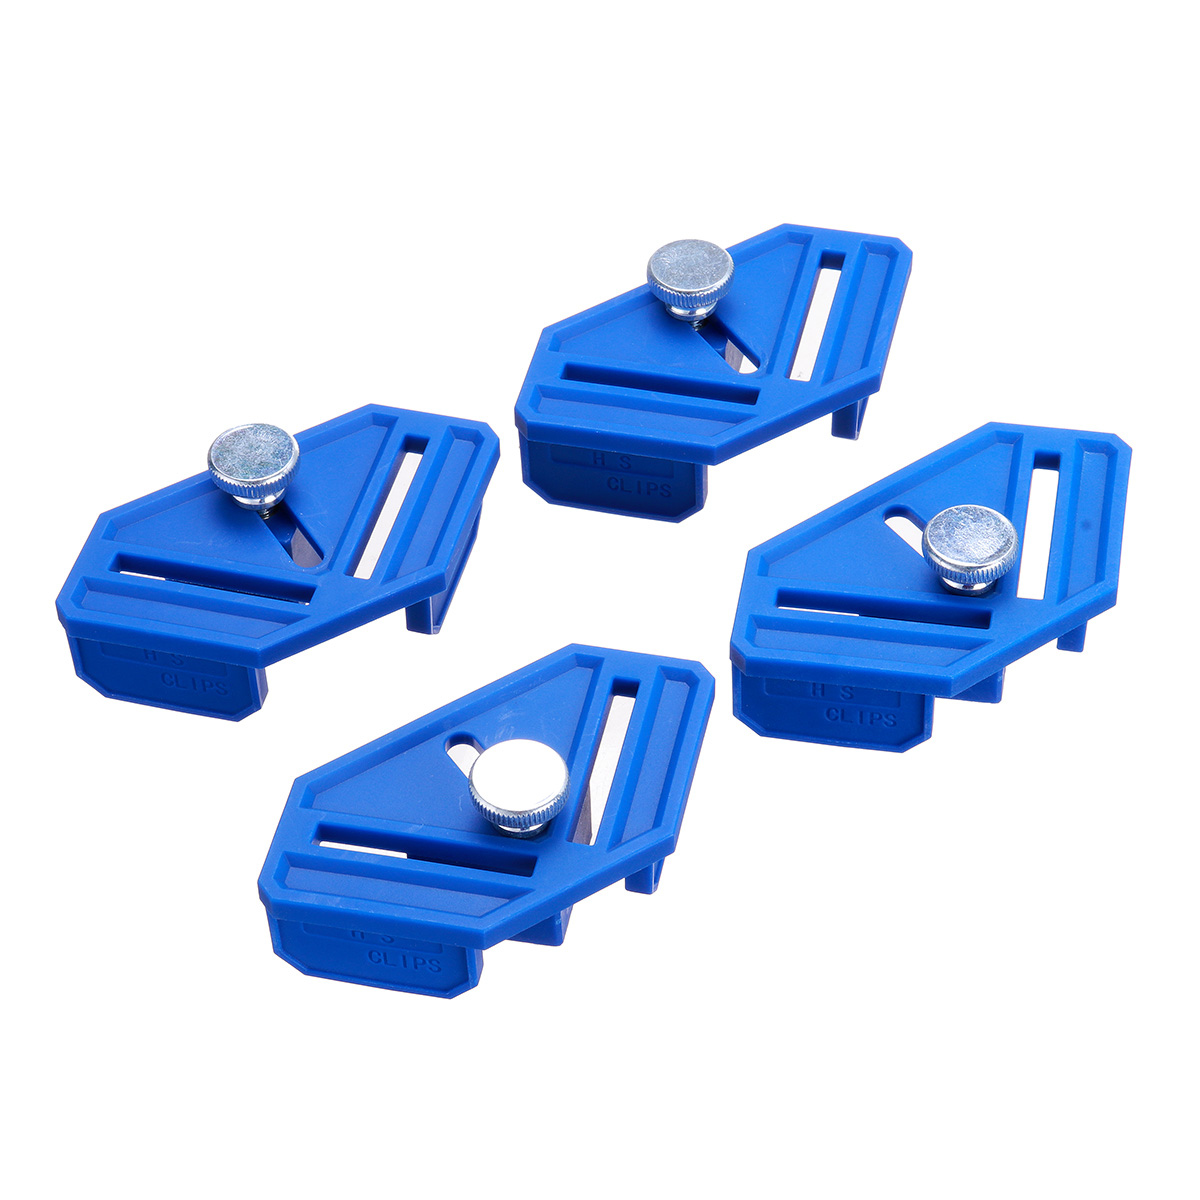 4pcs-Adjustable-Right-Angle-Positioning-Clamp-767642mm-Woodworking-Corner-Clamp-Right-Clips-DIY-Fixt-1889370-2